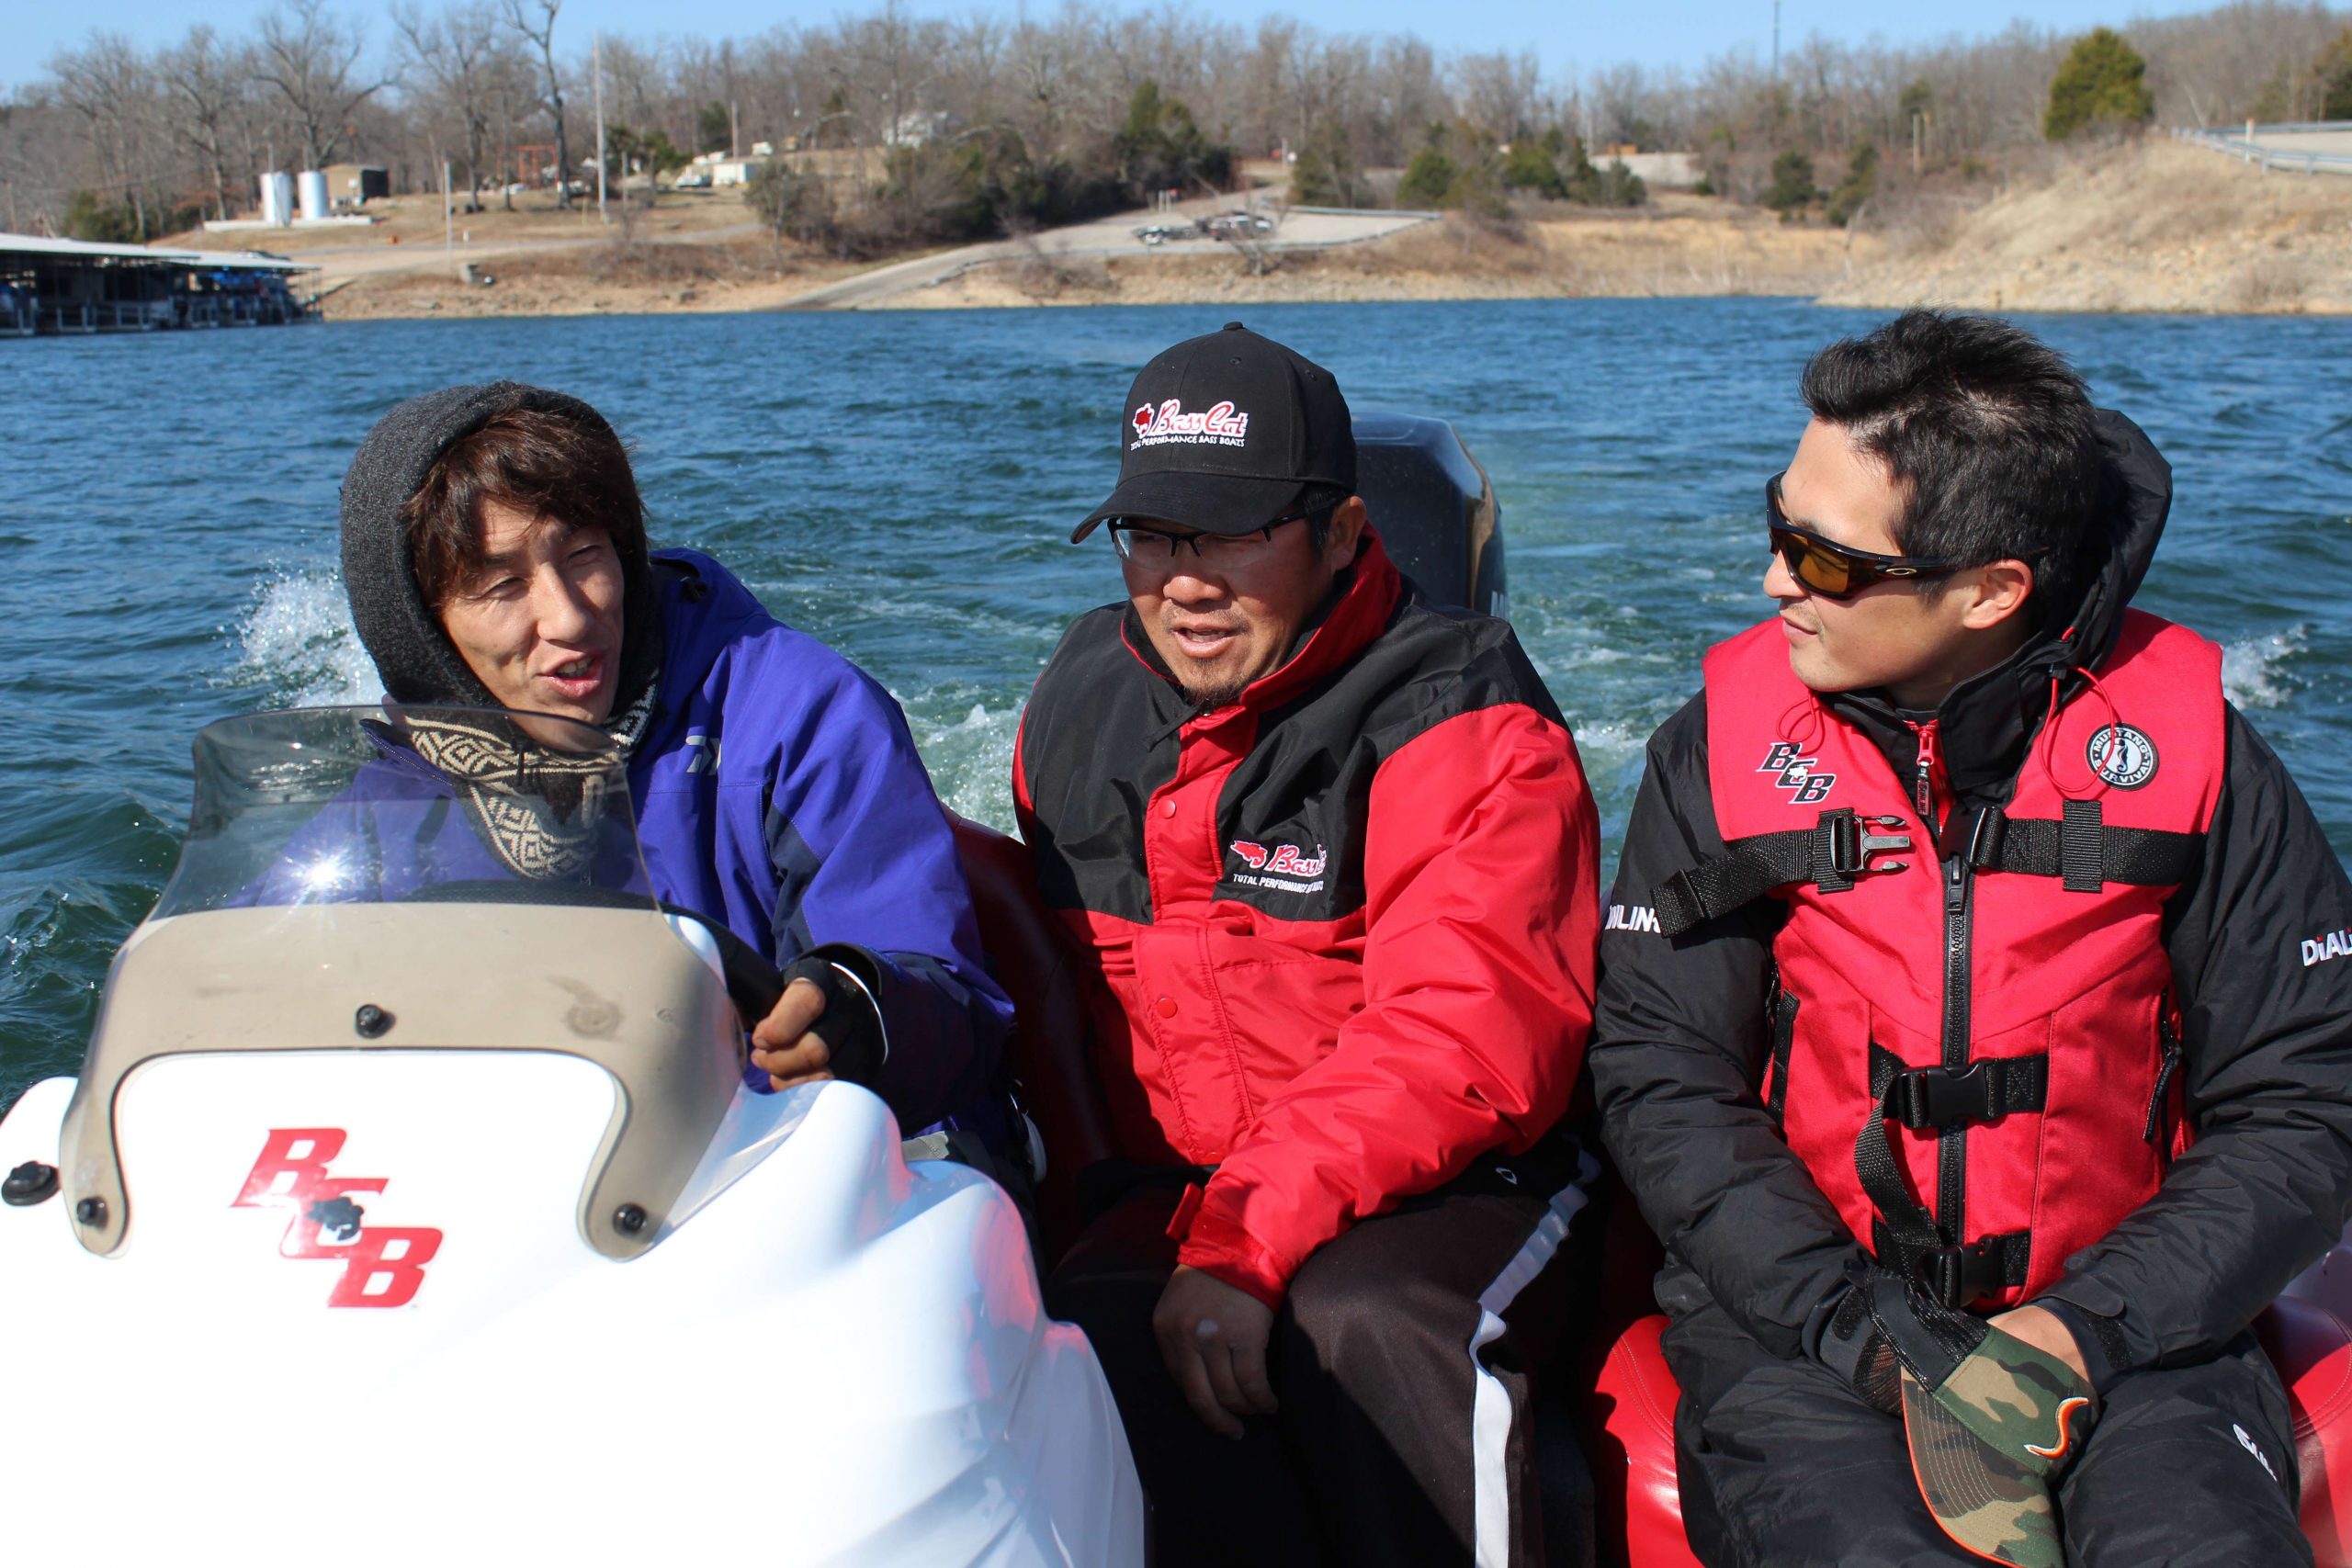 Here, Kiriyama talks to the team about Lake Norfork, offering tips on how to break it down.